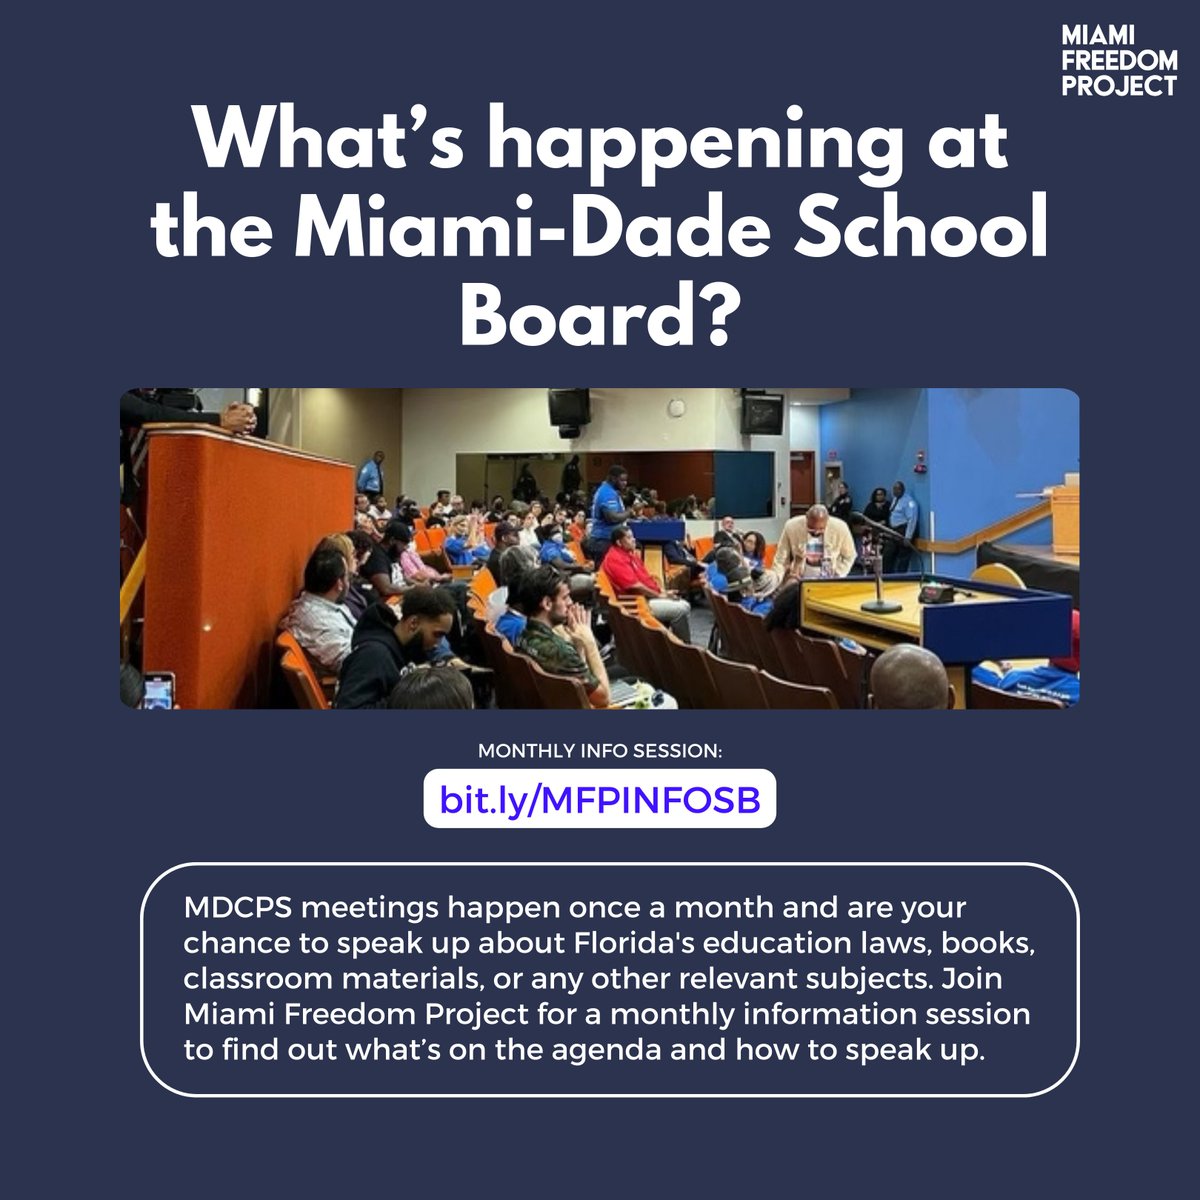 What's happening at the Miami-Dade School Board? MDCPS meetings happen once a month and are your chance to speak up about our education system. We host a monthly info session to discuss the agenda and how to give comment. Next one is this Monday. Join us: bit.ly/MFPINFOSB